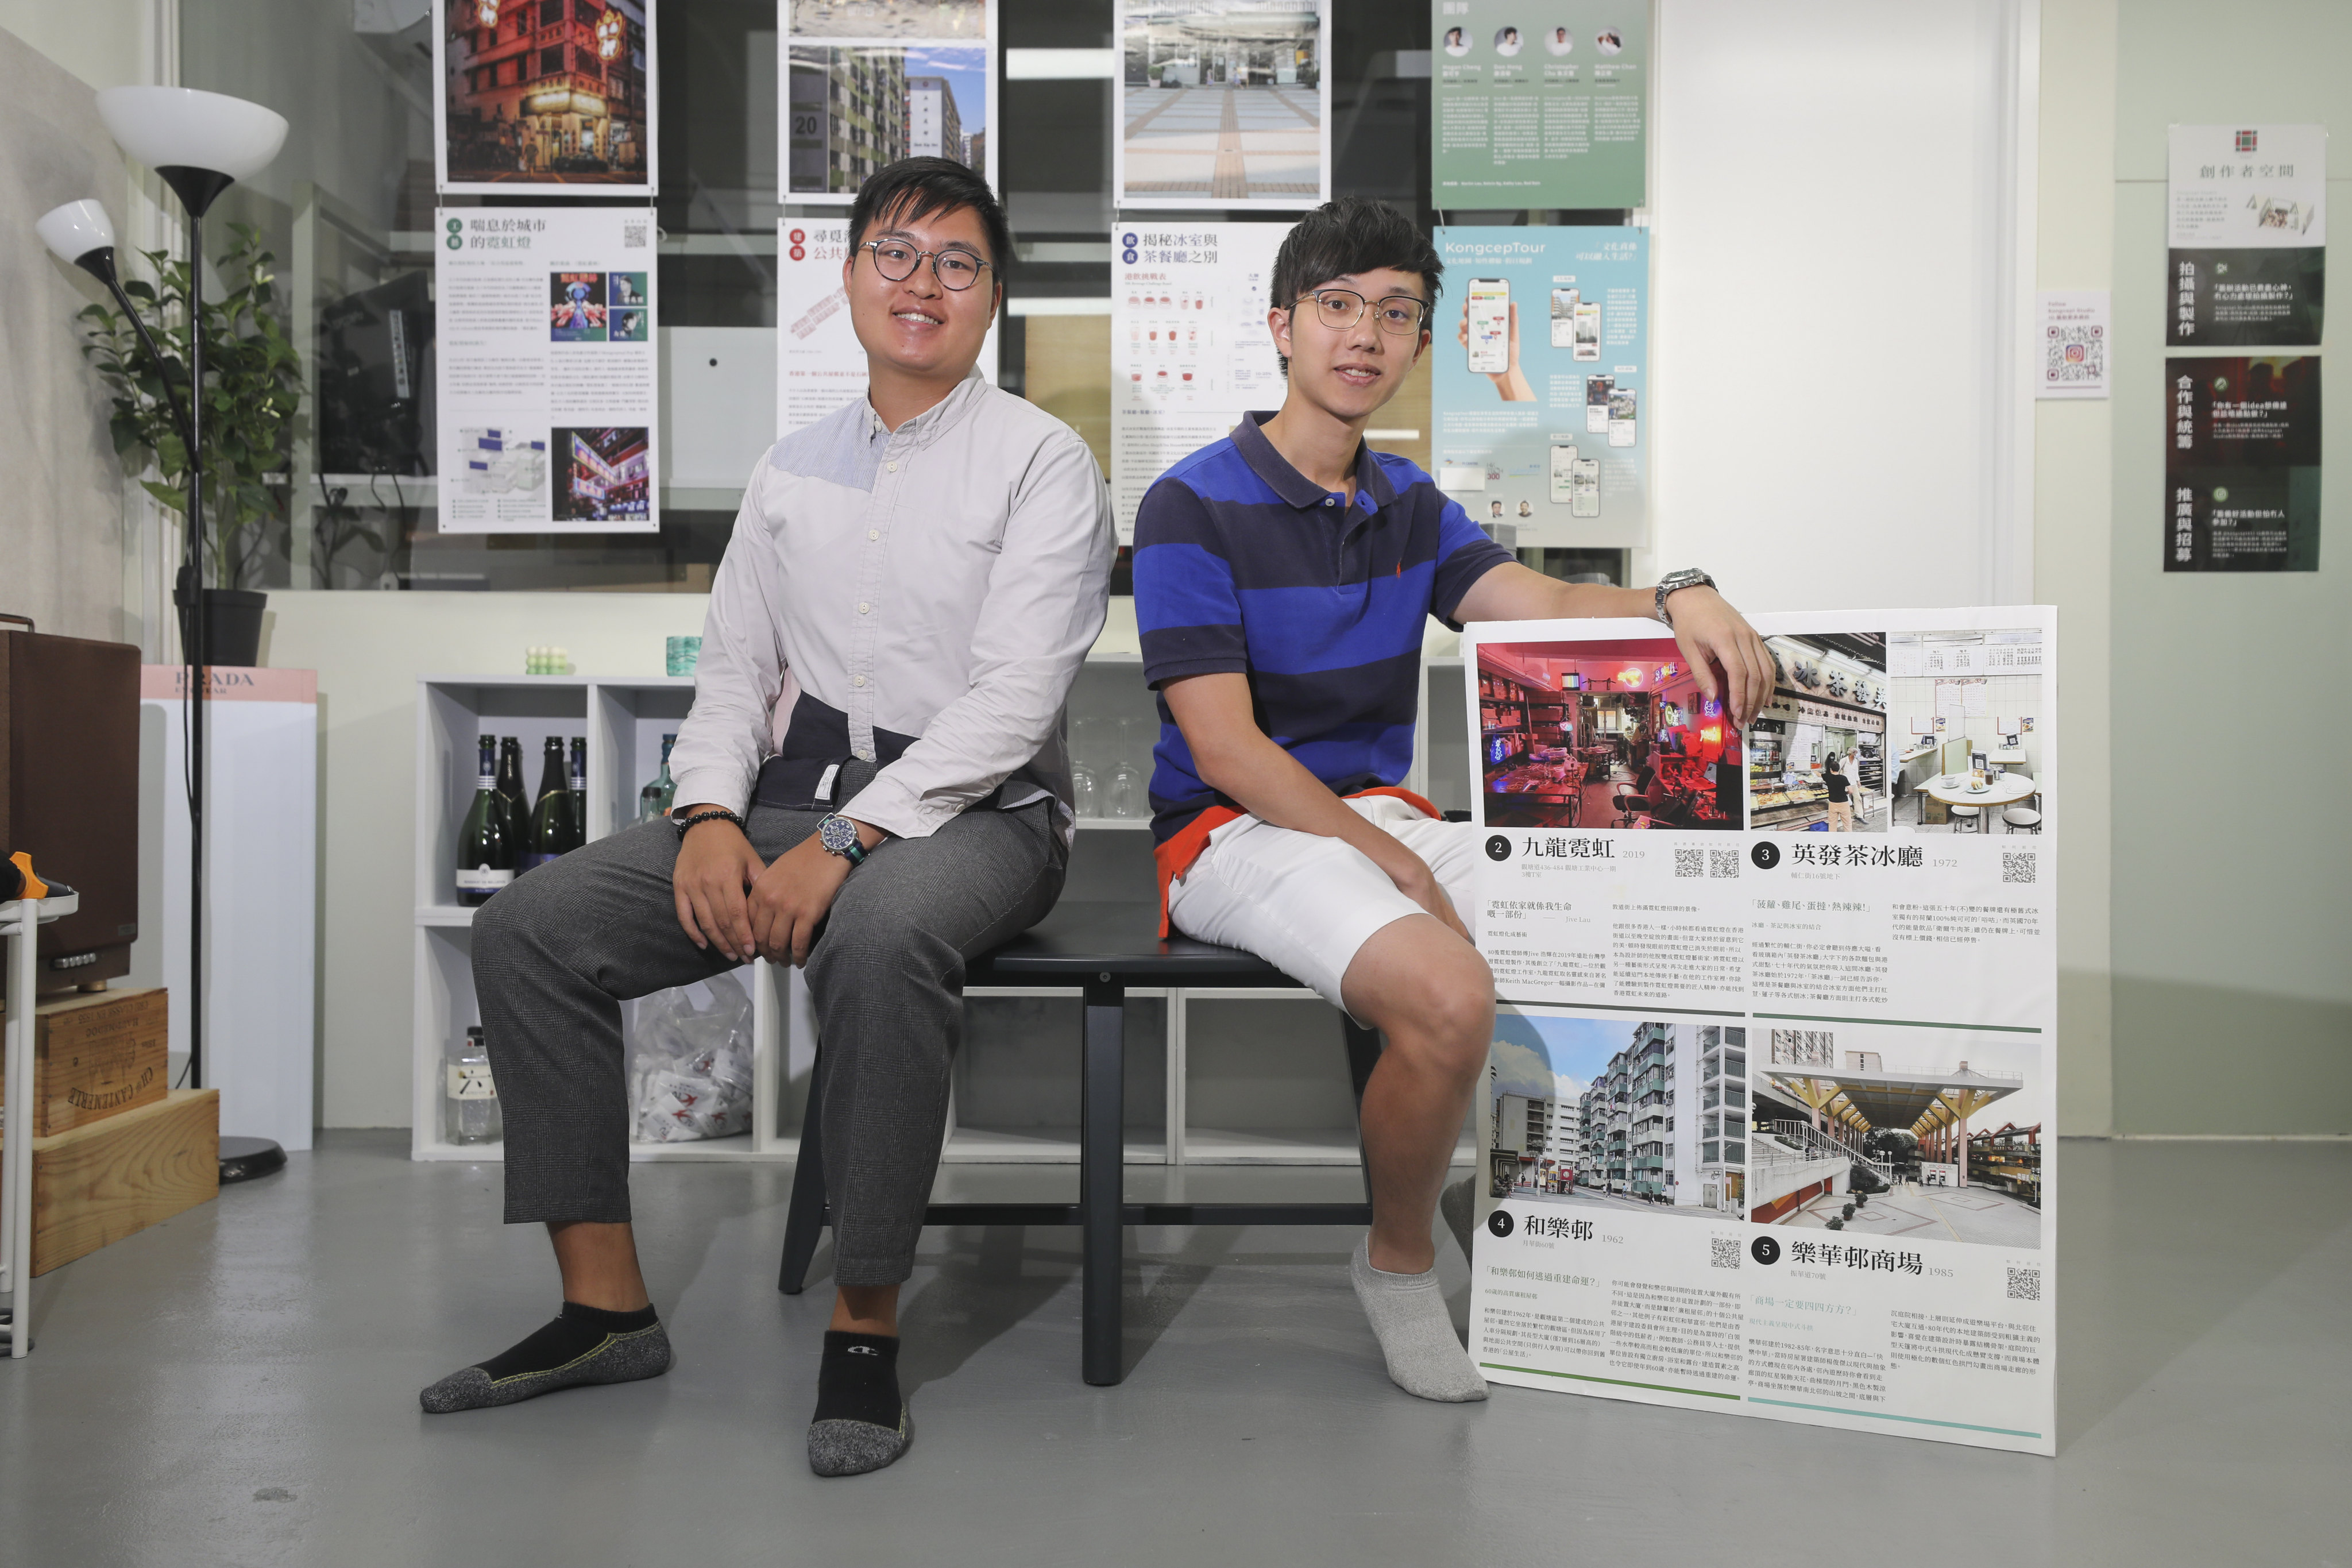 Christopher Chu (left) and Hogan Cheng are two of Kongcept’s founders. Photo: Xiaomei Chen